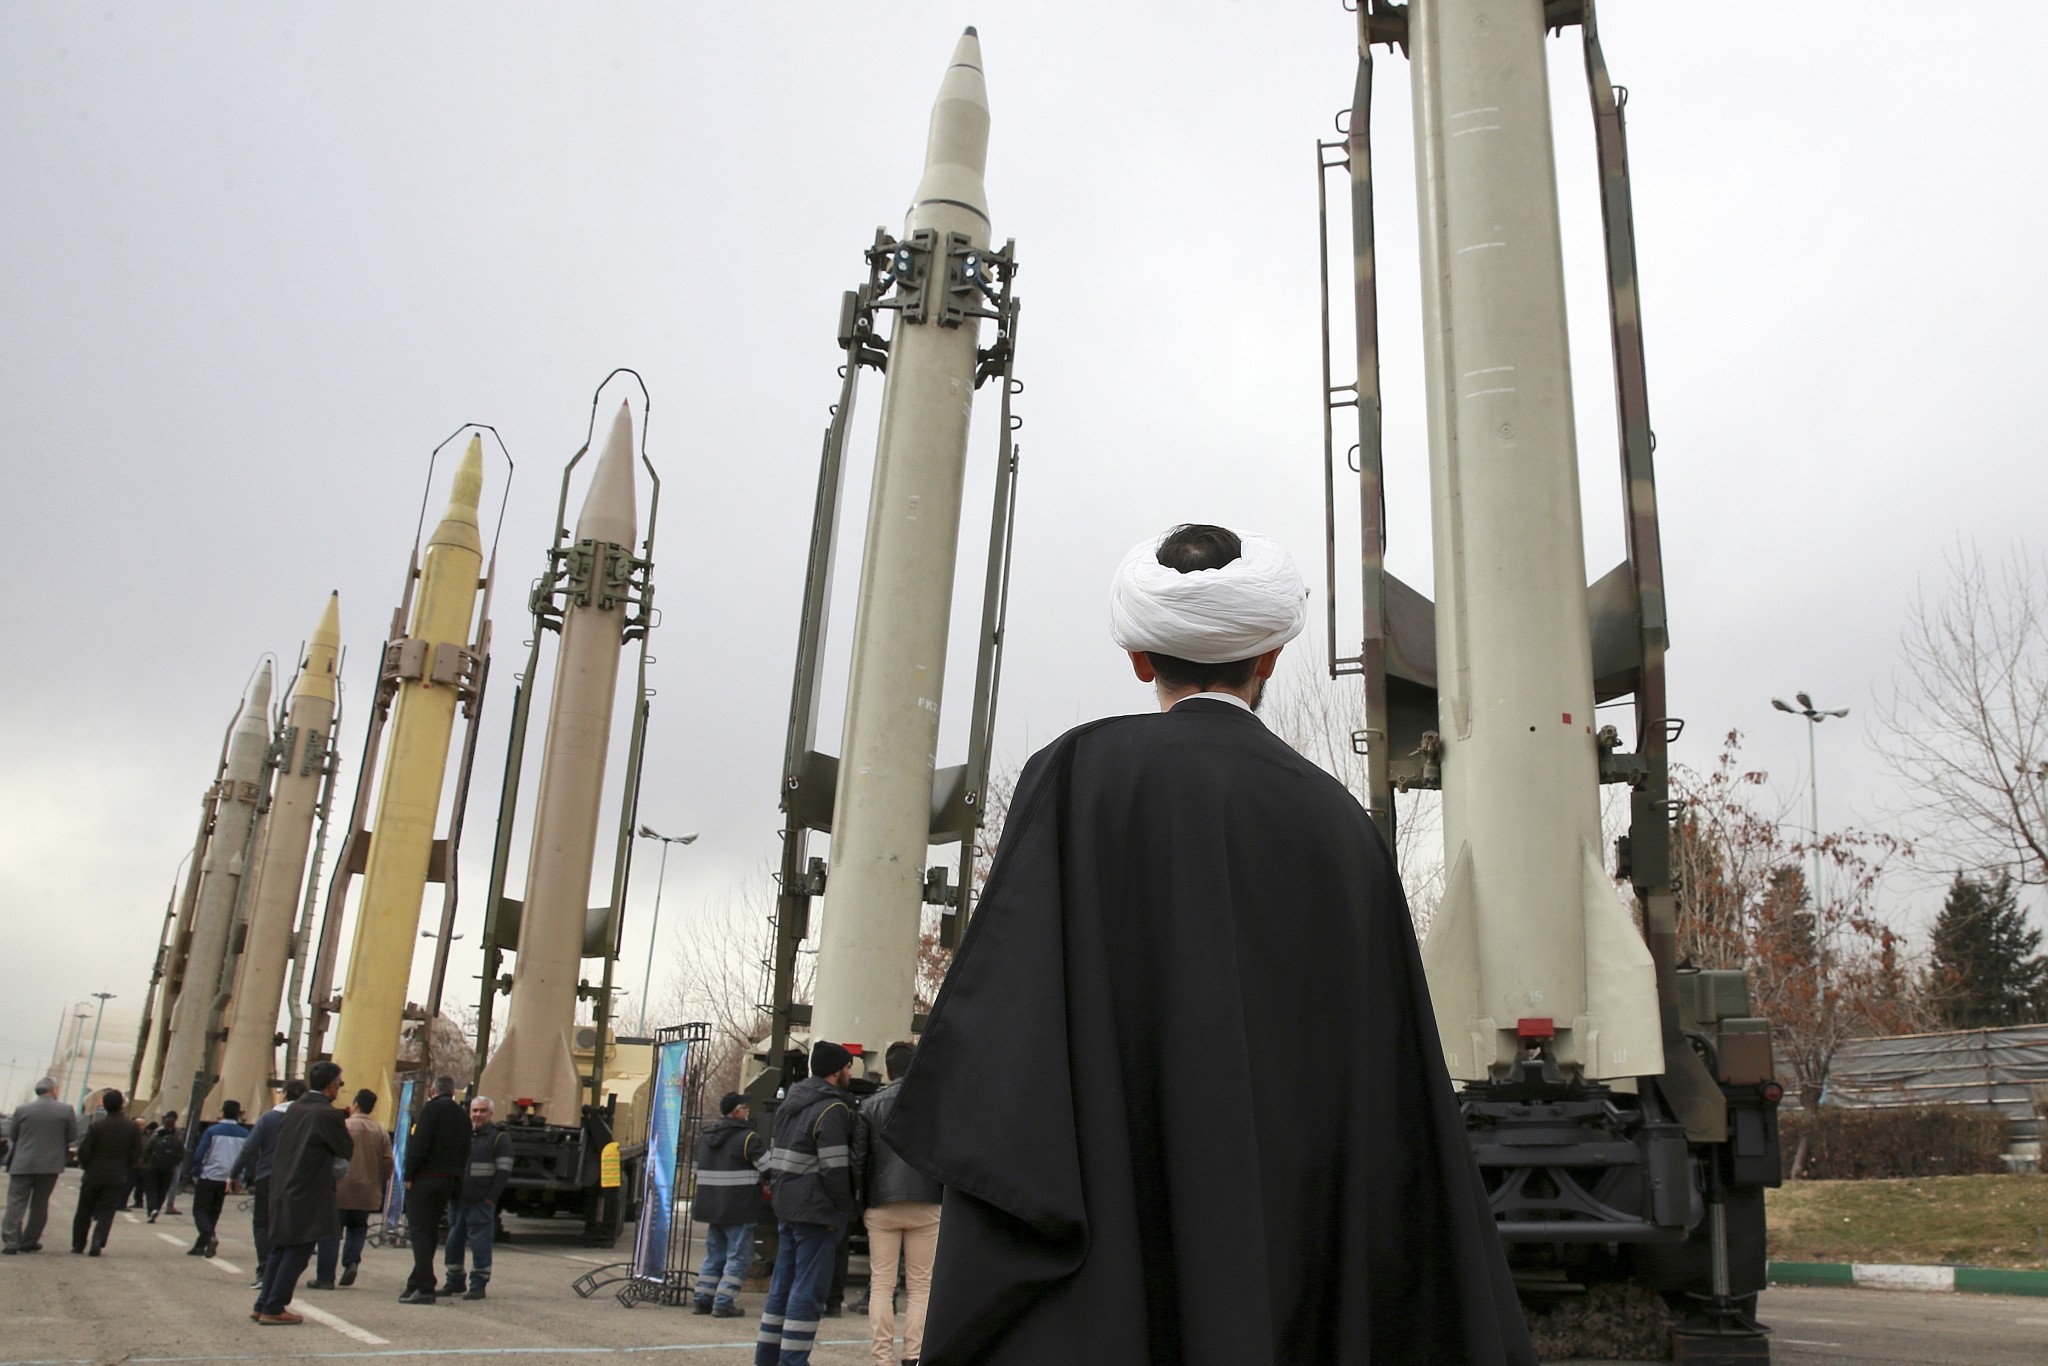 An Iranian clergyman looks at domestically built surface to surface missiles displayed by the Revolutionary Guard in a military show marking the 40th anniversary of the Islamic Revolution, at Imam Khomeini Grand Mosque in Tehran, Iran, February 3, 2019. (Vahid Salemi/AP)